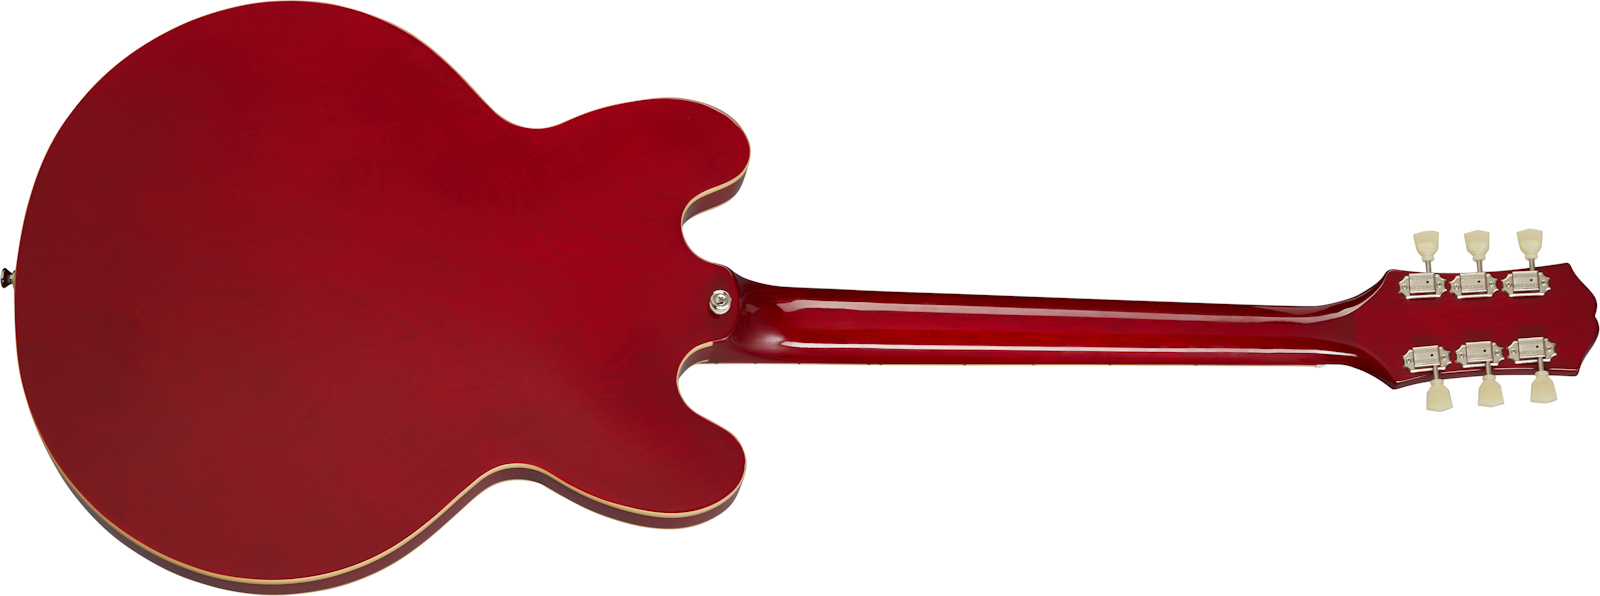 Epiphone Es-335 Lh Inspired By Gibson Original Gaucher 2h Ht Rw - Cherry - Left-handed electric guitar - Variation 1